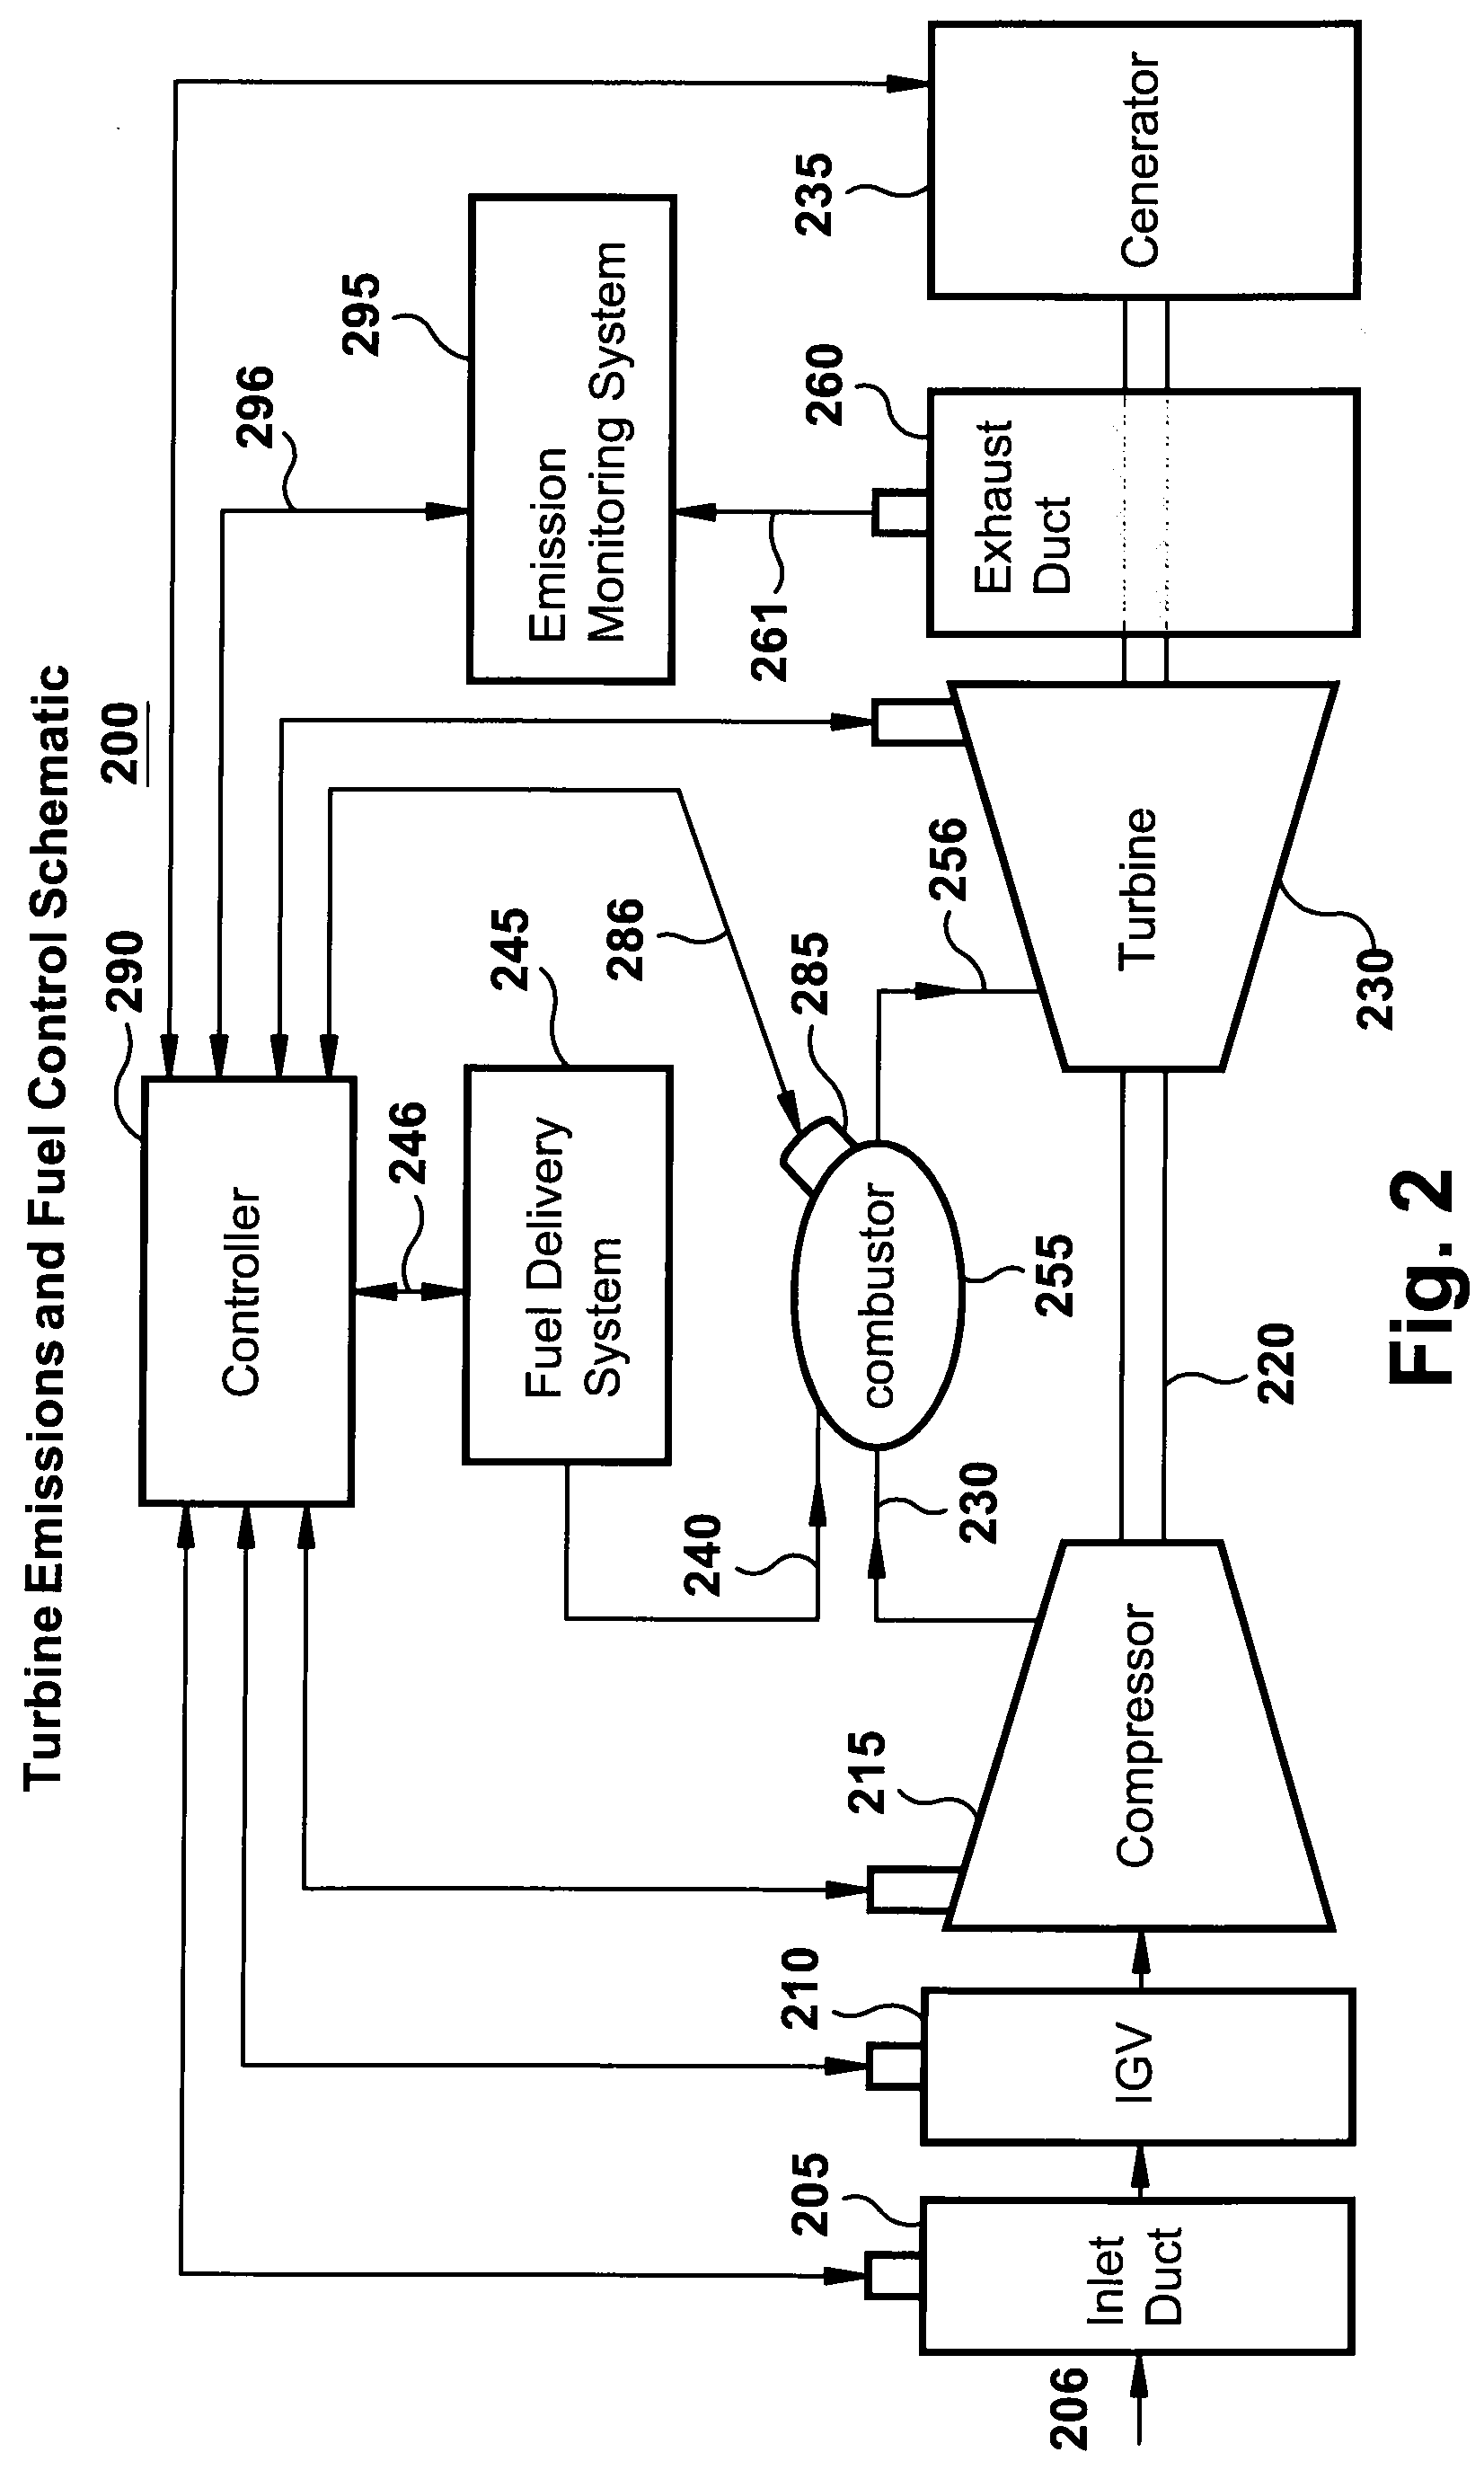 System and method for automatic fuel blending and control for combustion gas turbine